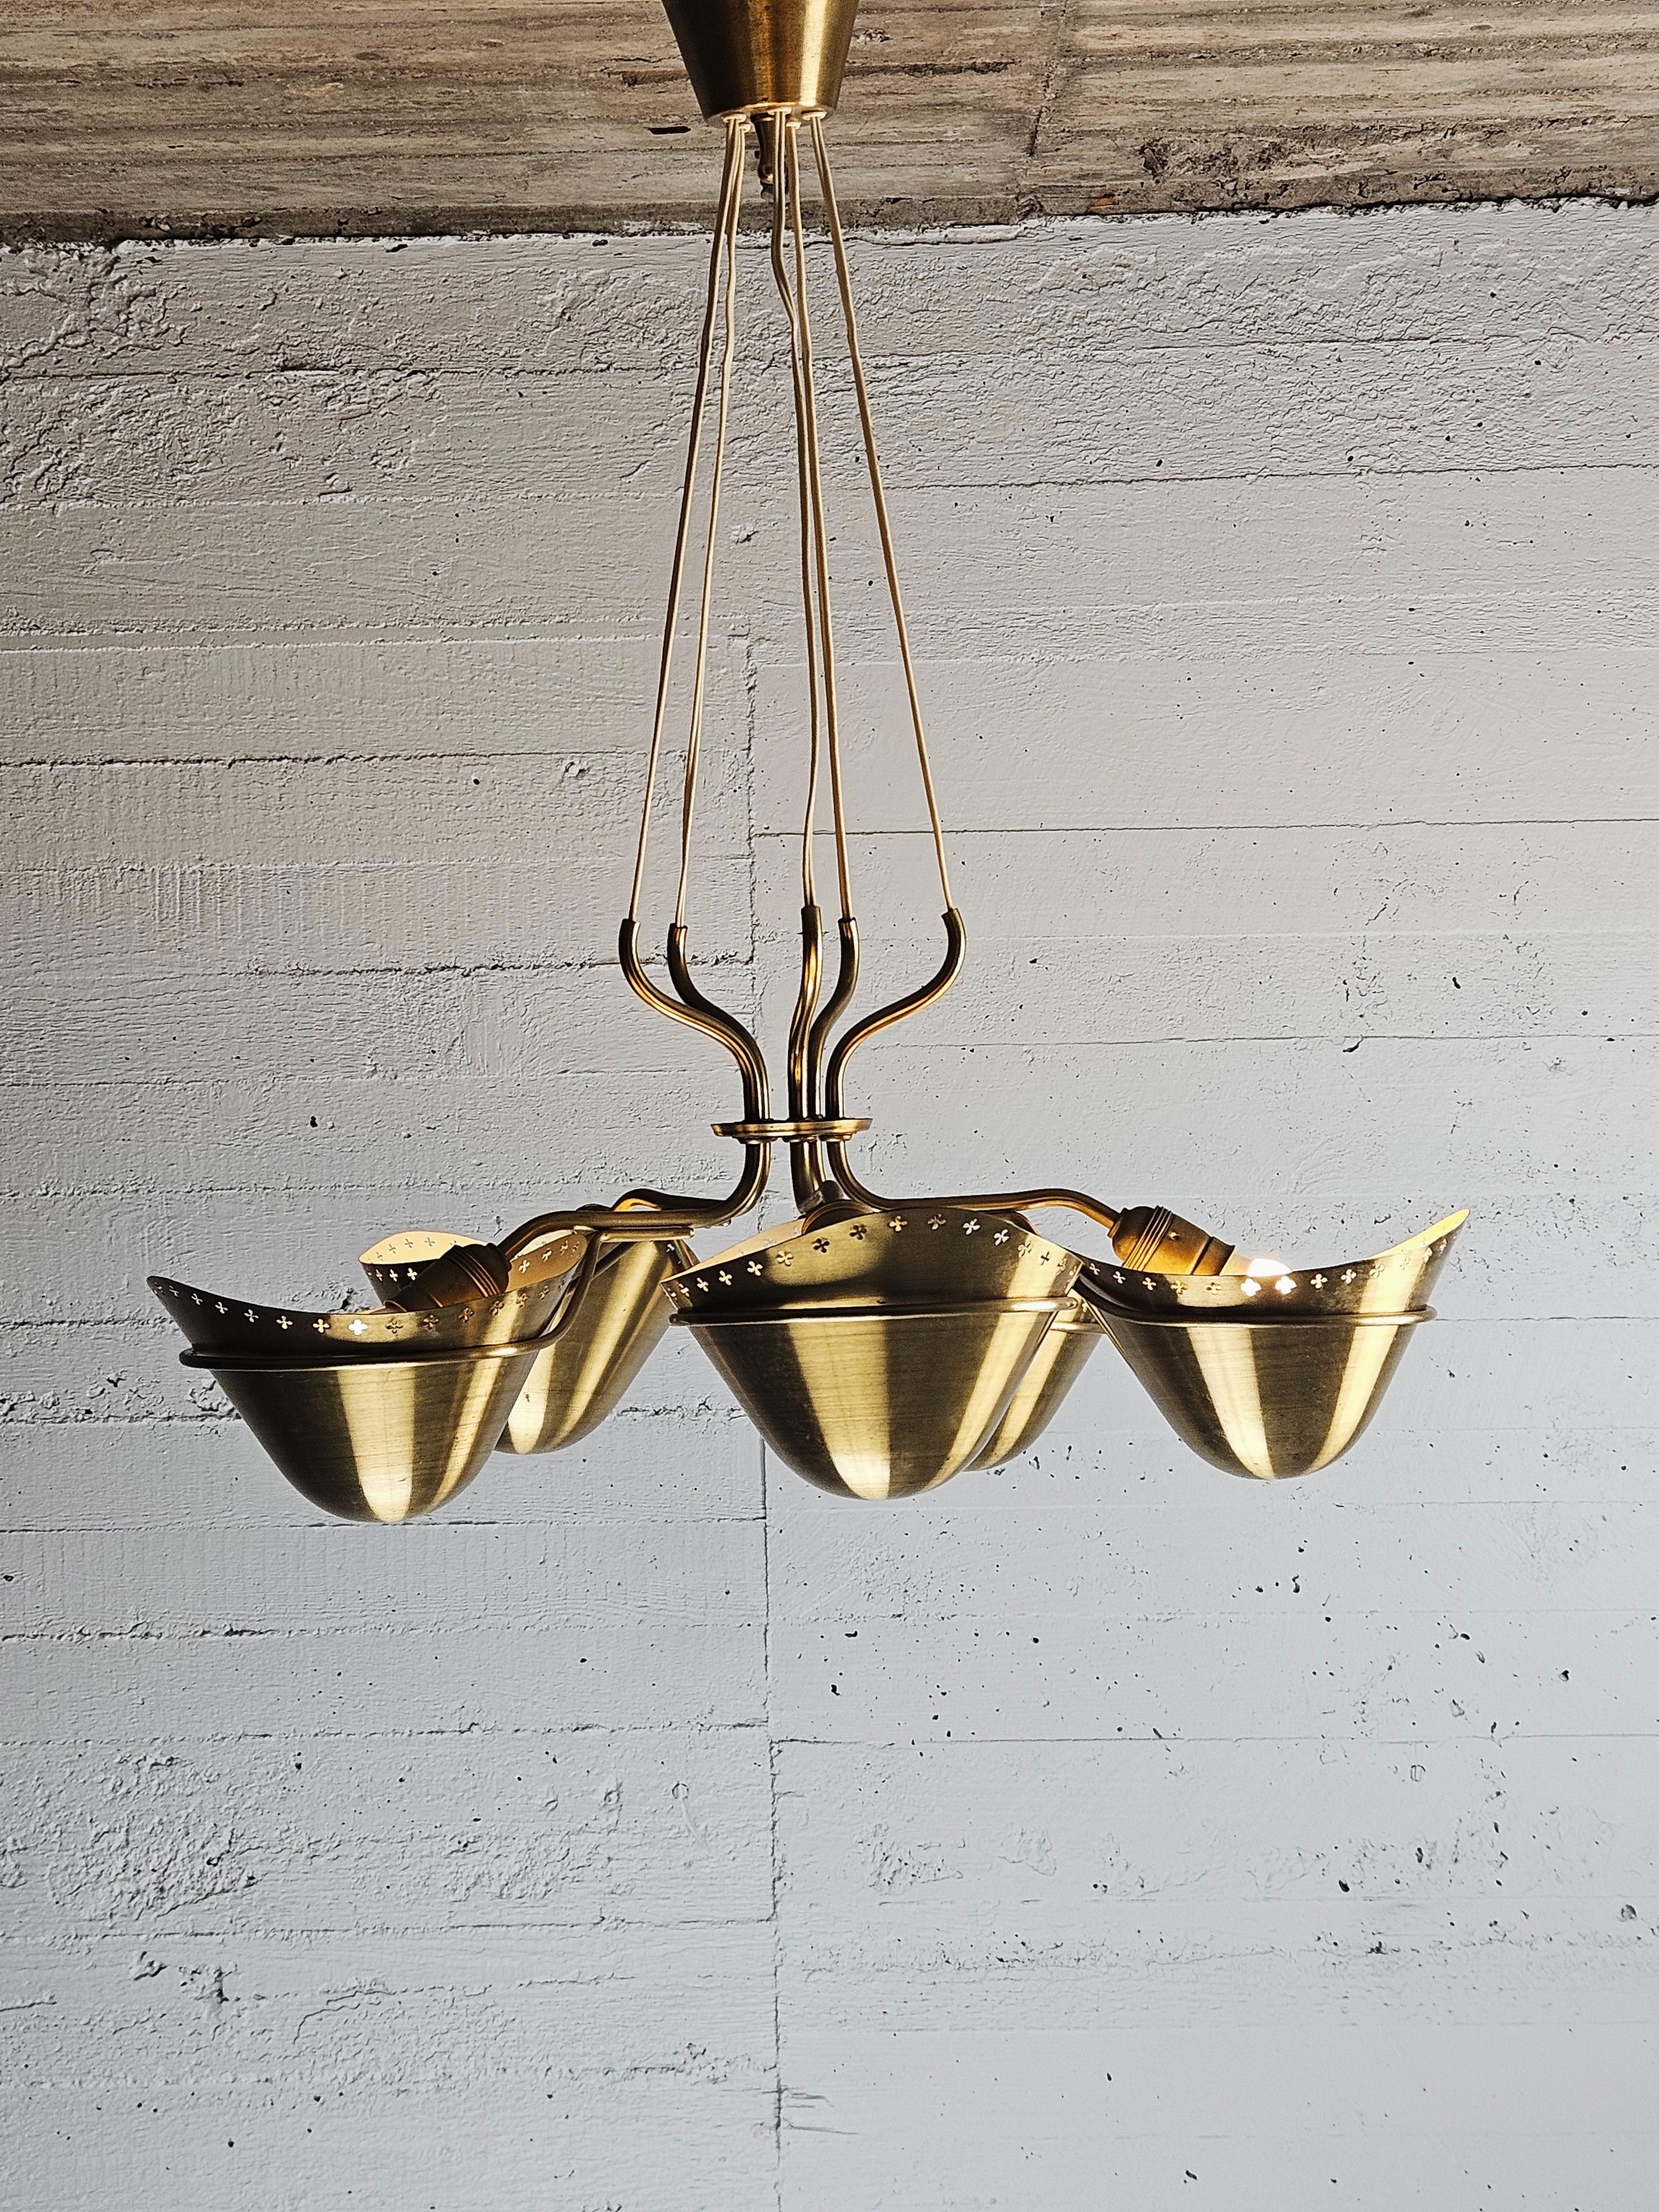 Swedish modern brass ceiling lamp. The design very well embrase the Scandinavian modern style and designers like Carl-Axel Acking or Hans Bergström comes to mind. The designer though for this model is unknown. 

Made in brass and gives a beautiful